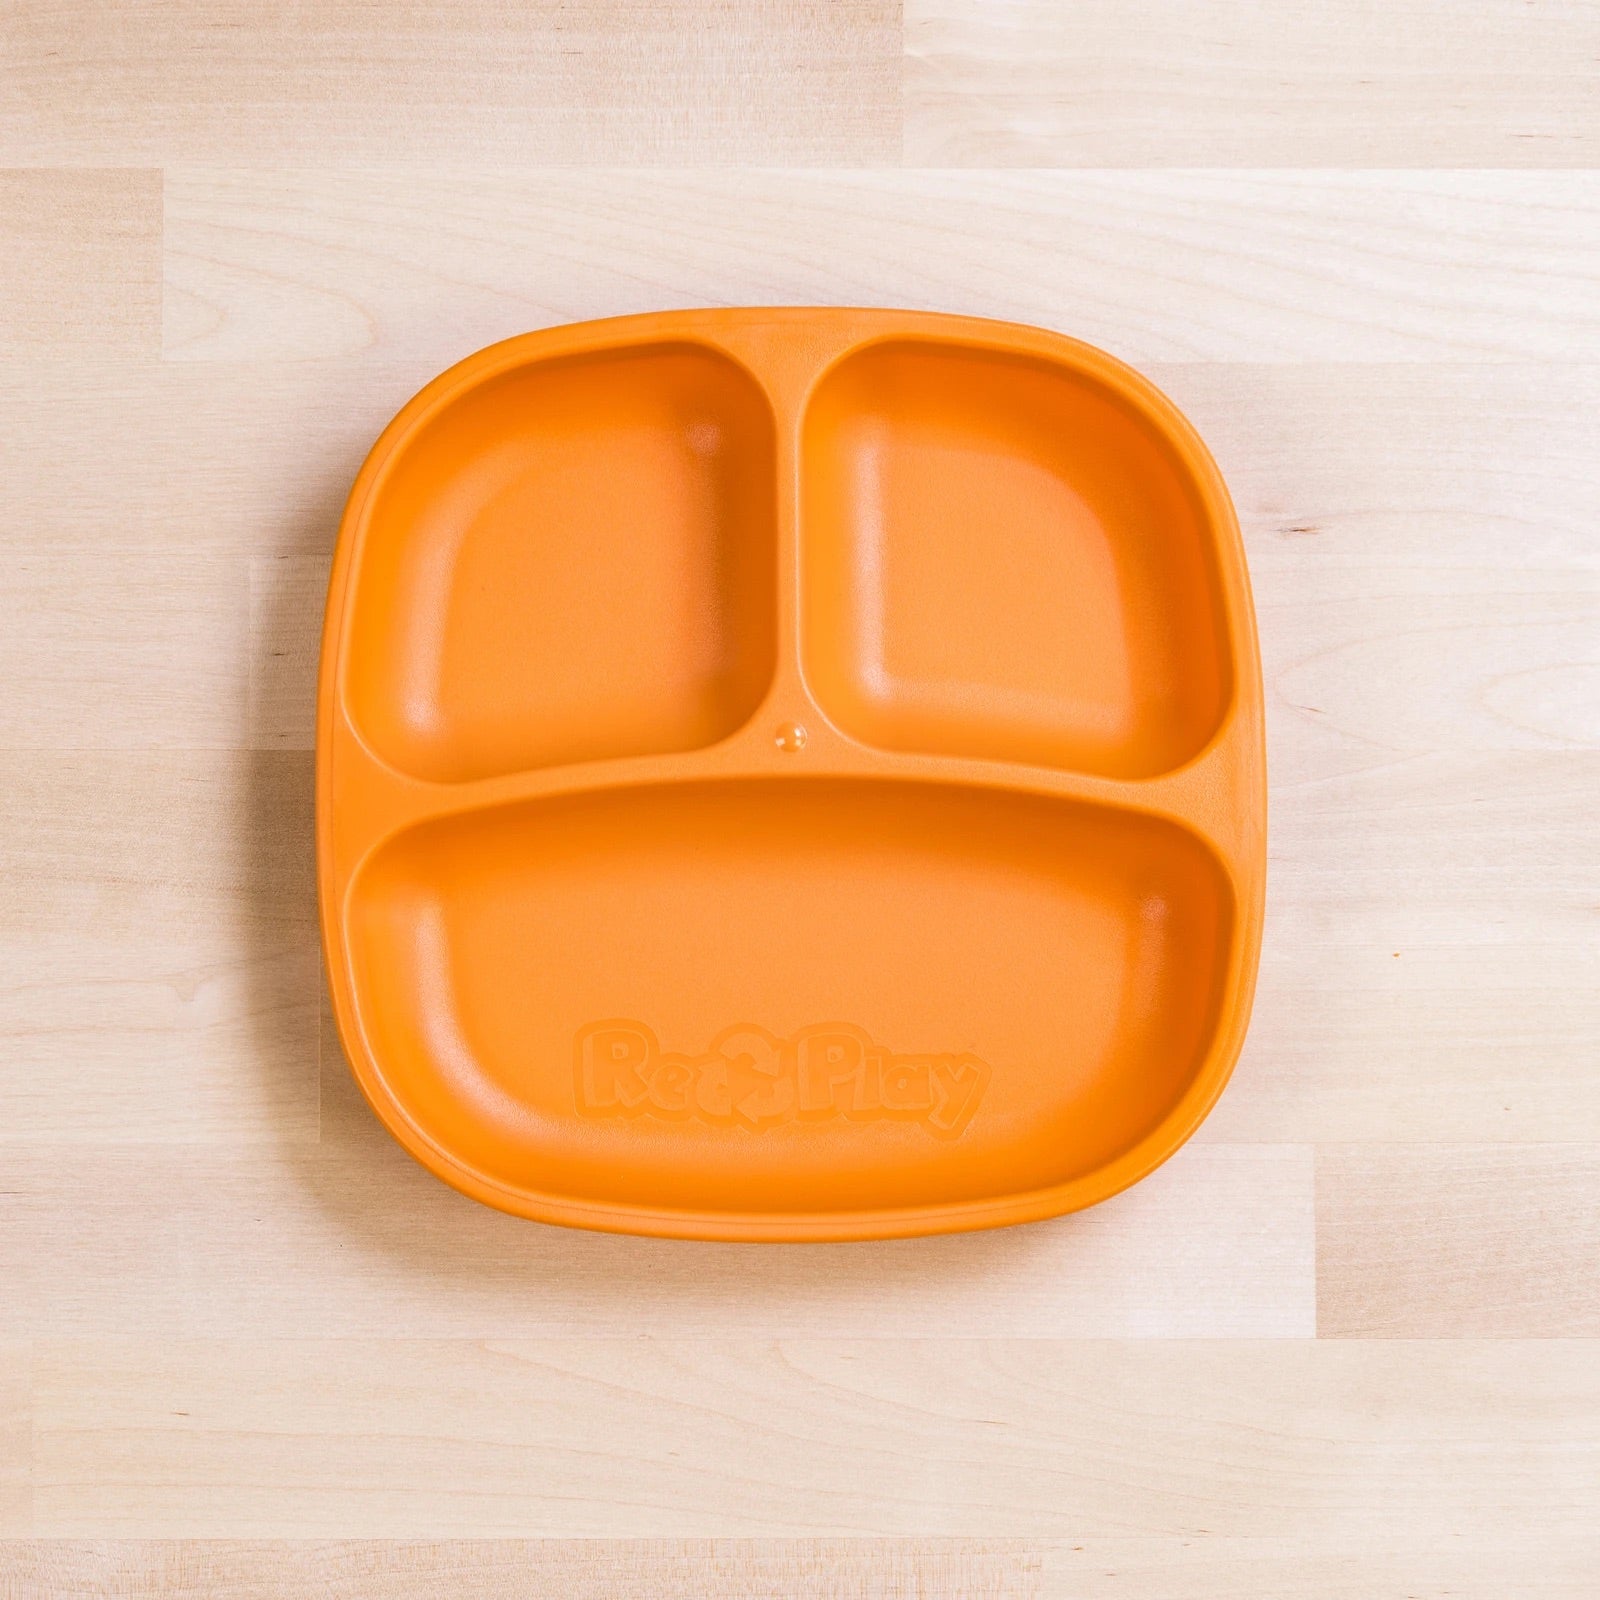 Re-Play Divided Plate Orange